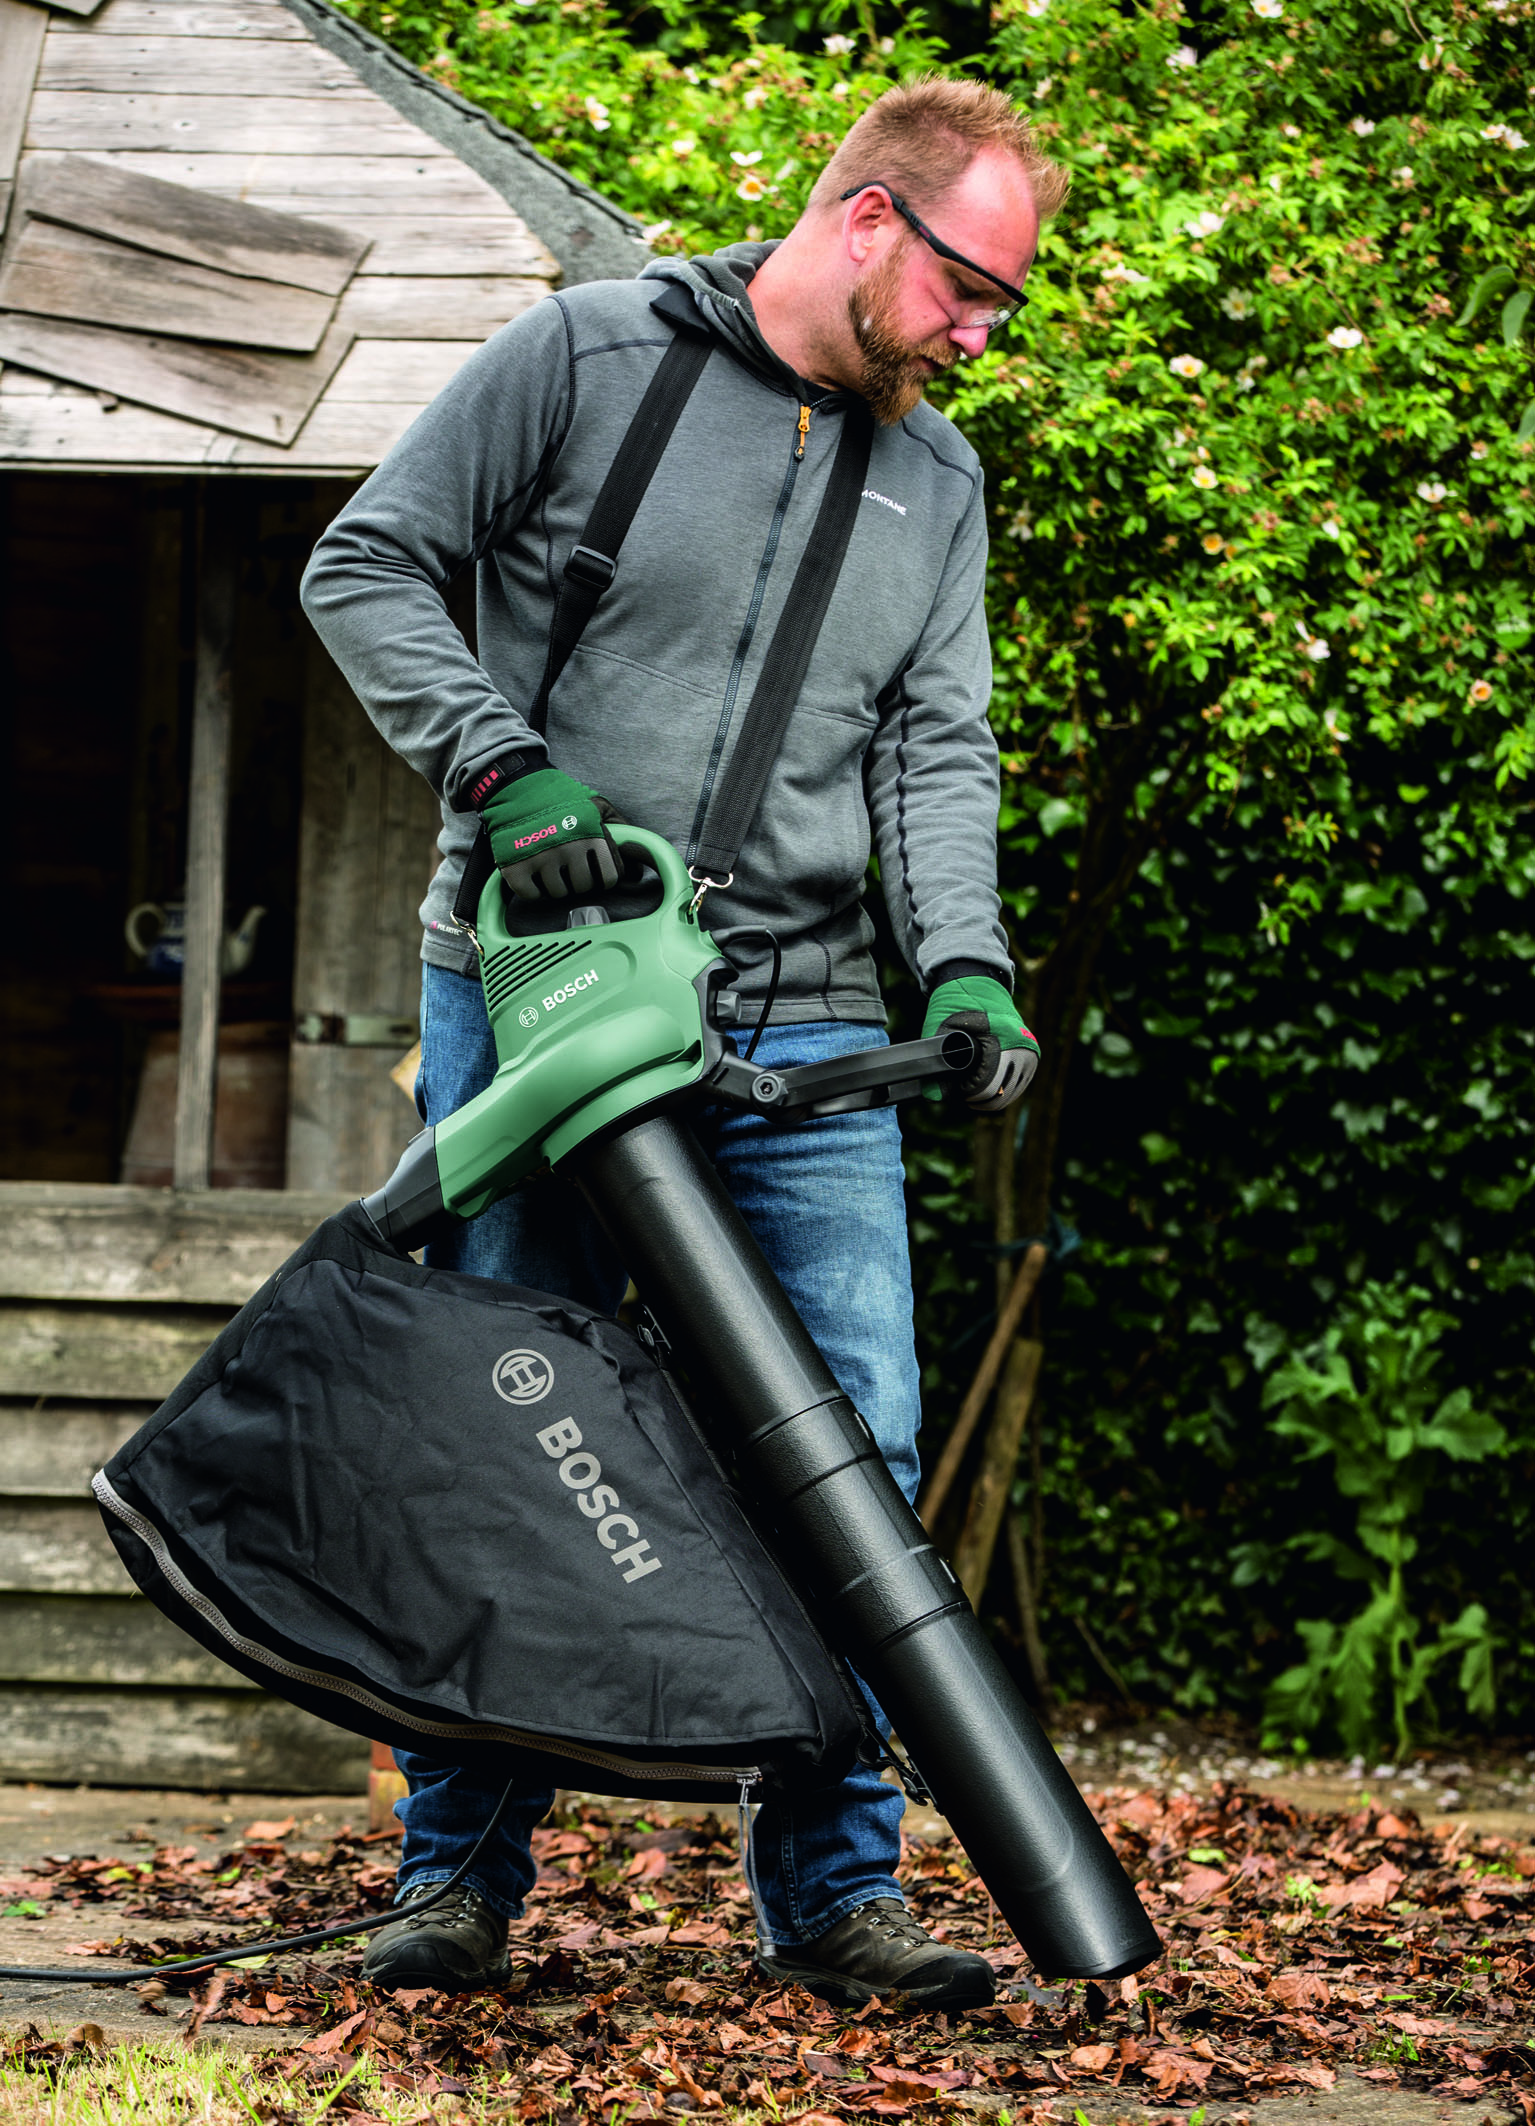 More comfortable garden clearing: The UniversalGardenTidy from Bosch